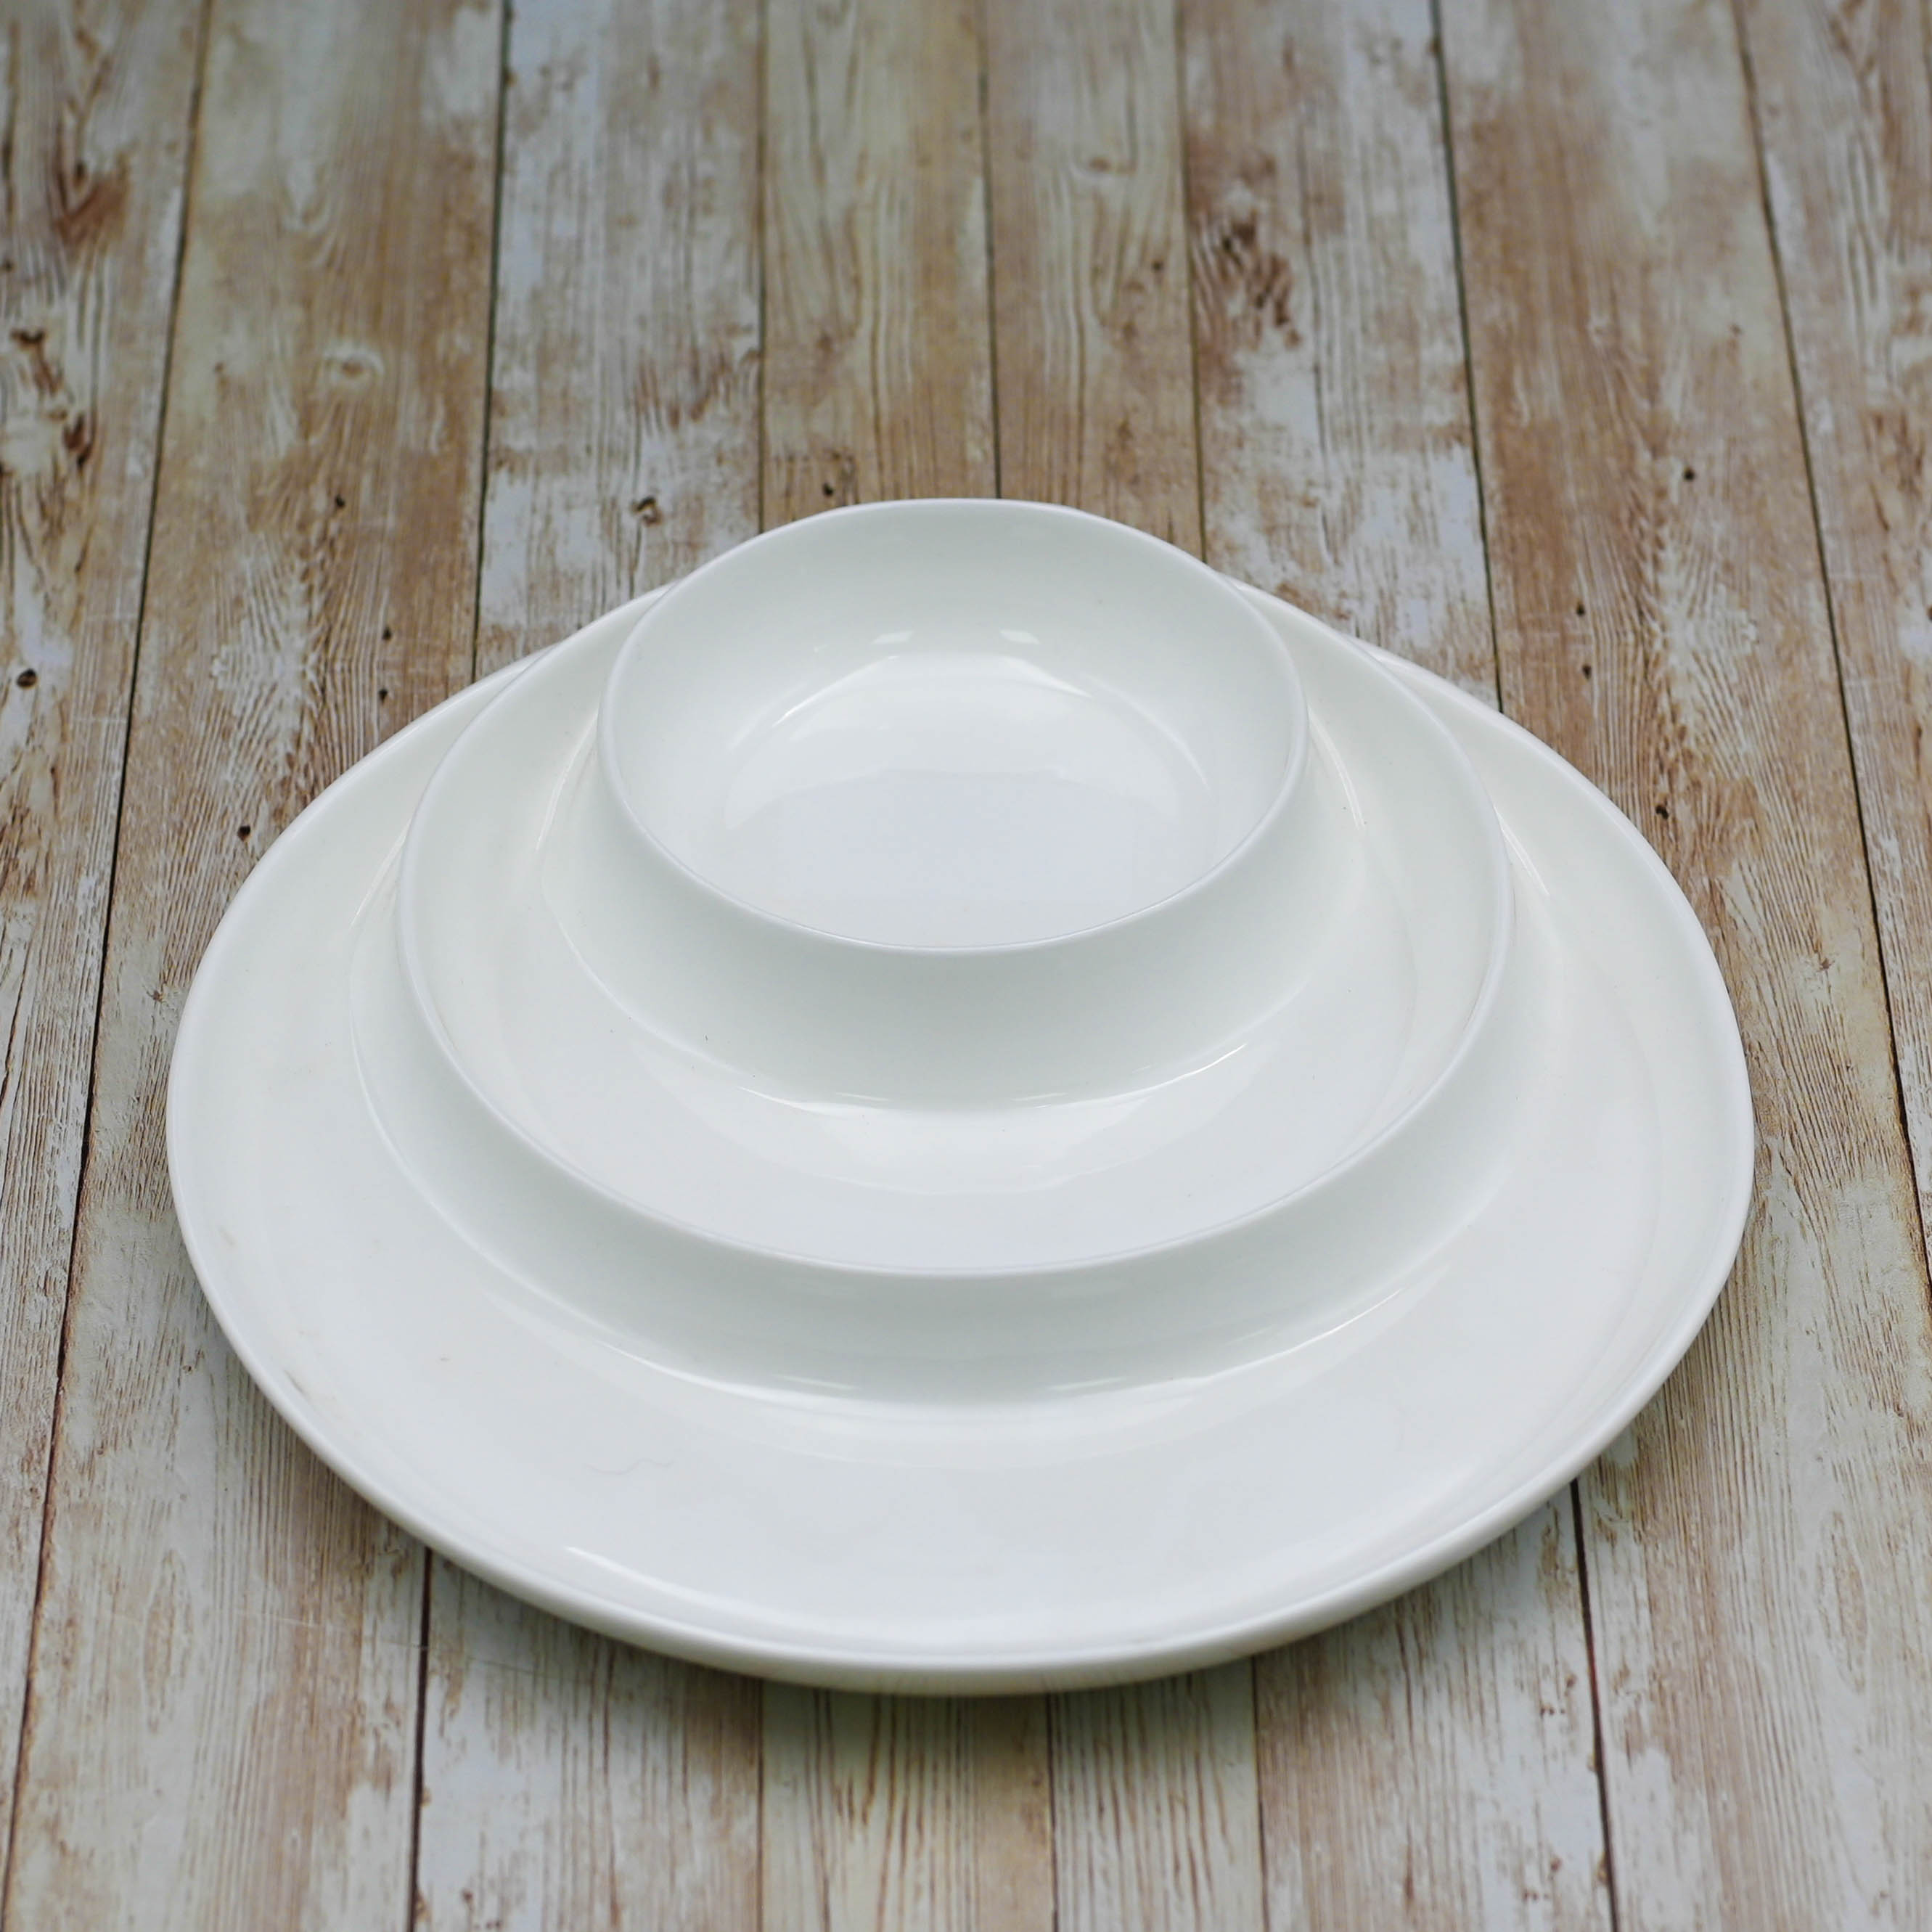 White Divided Dish 10" inch | 25.5 Cm